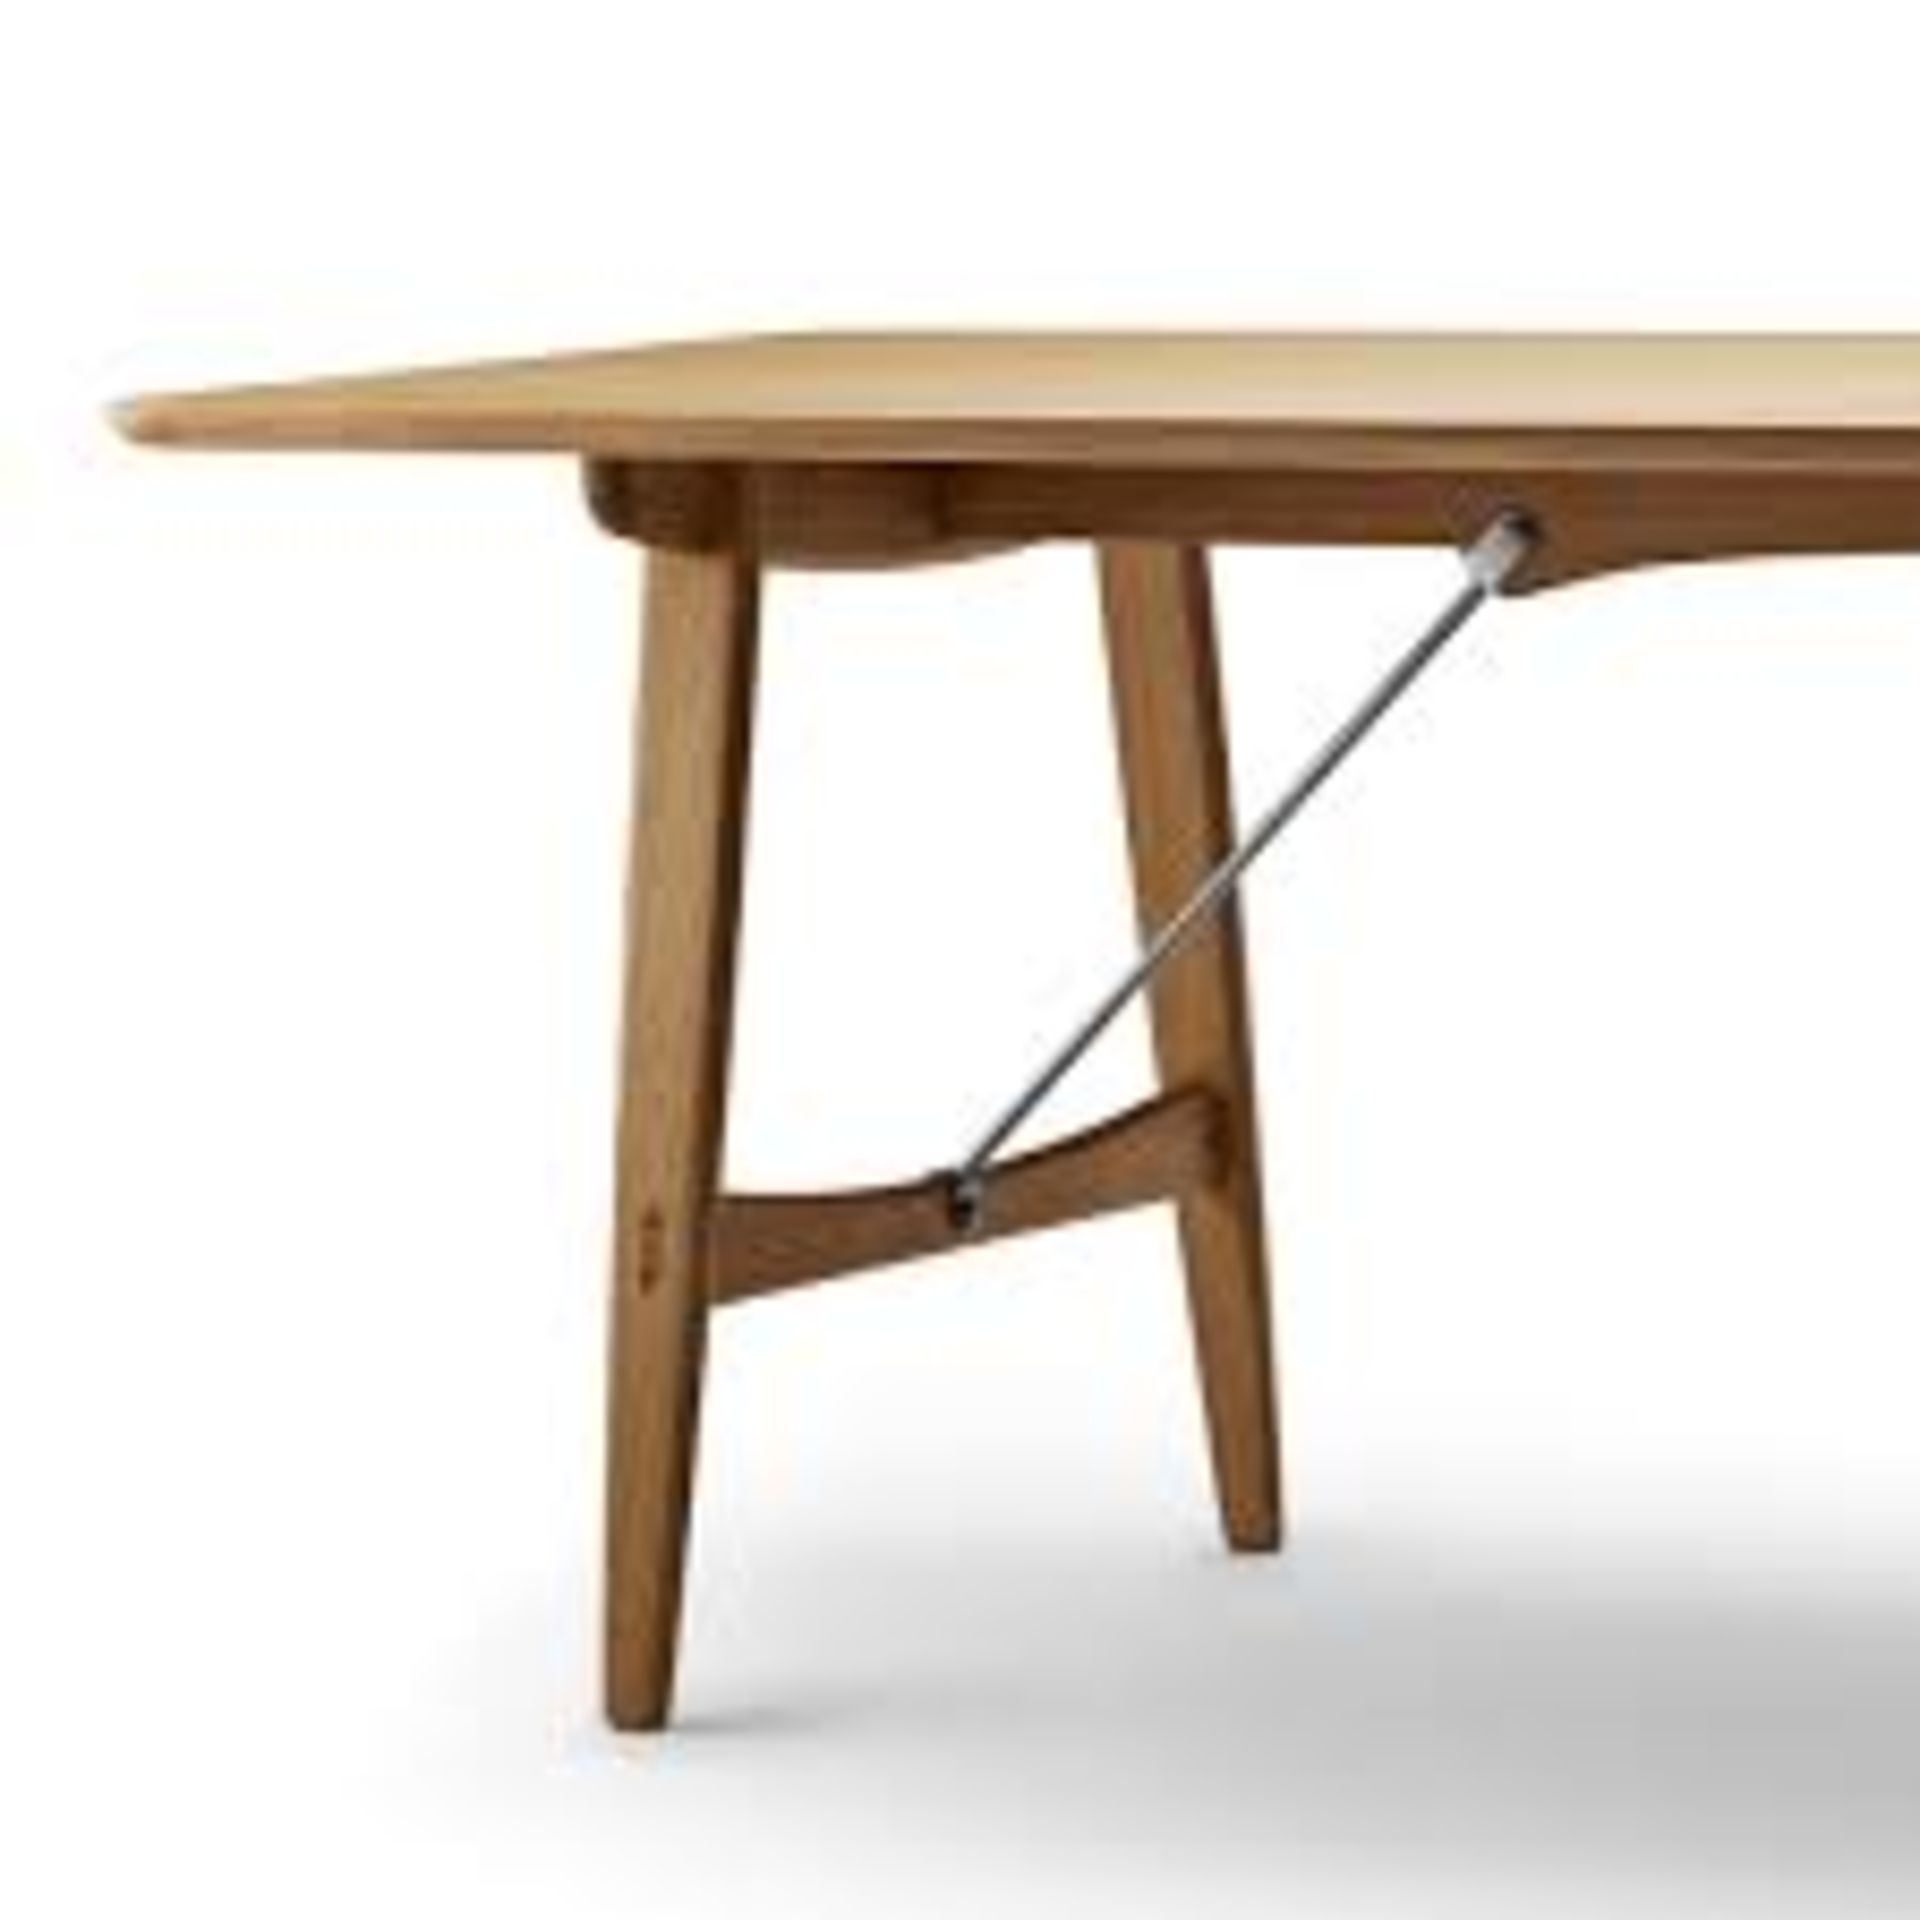 Boxed Hunter Golden Oak Designer Dining Table RRP £300 (Sourced From A High End Furniture